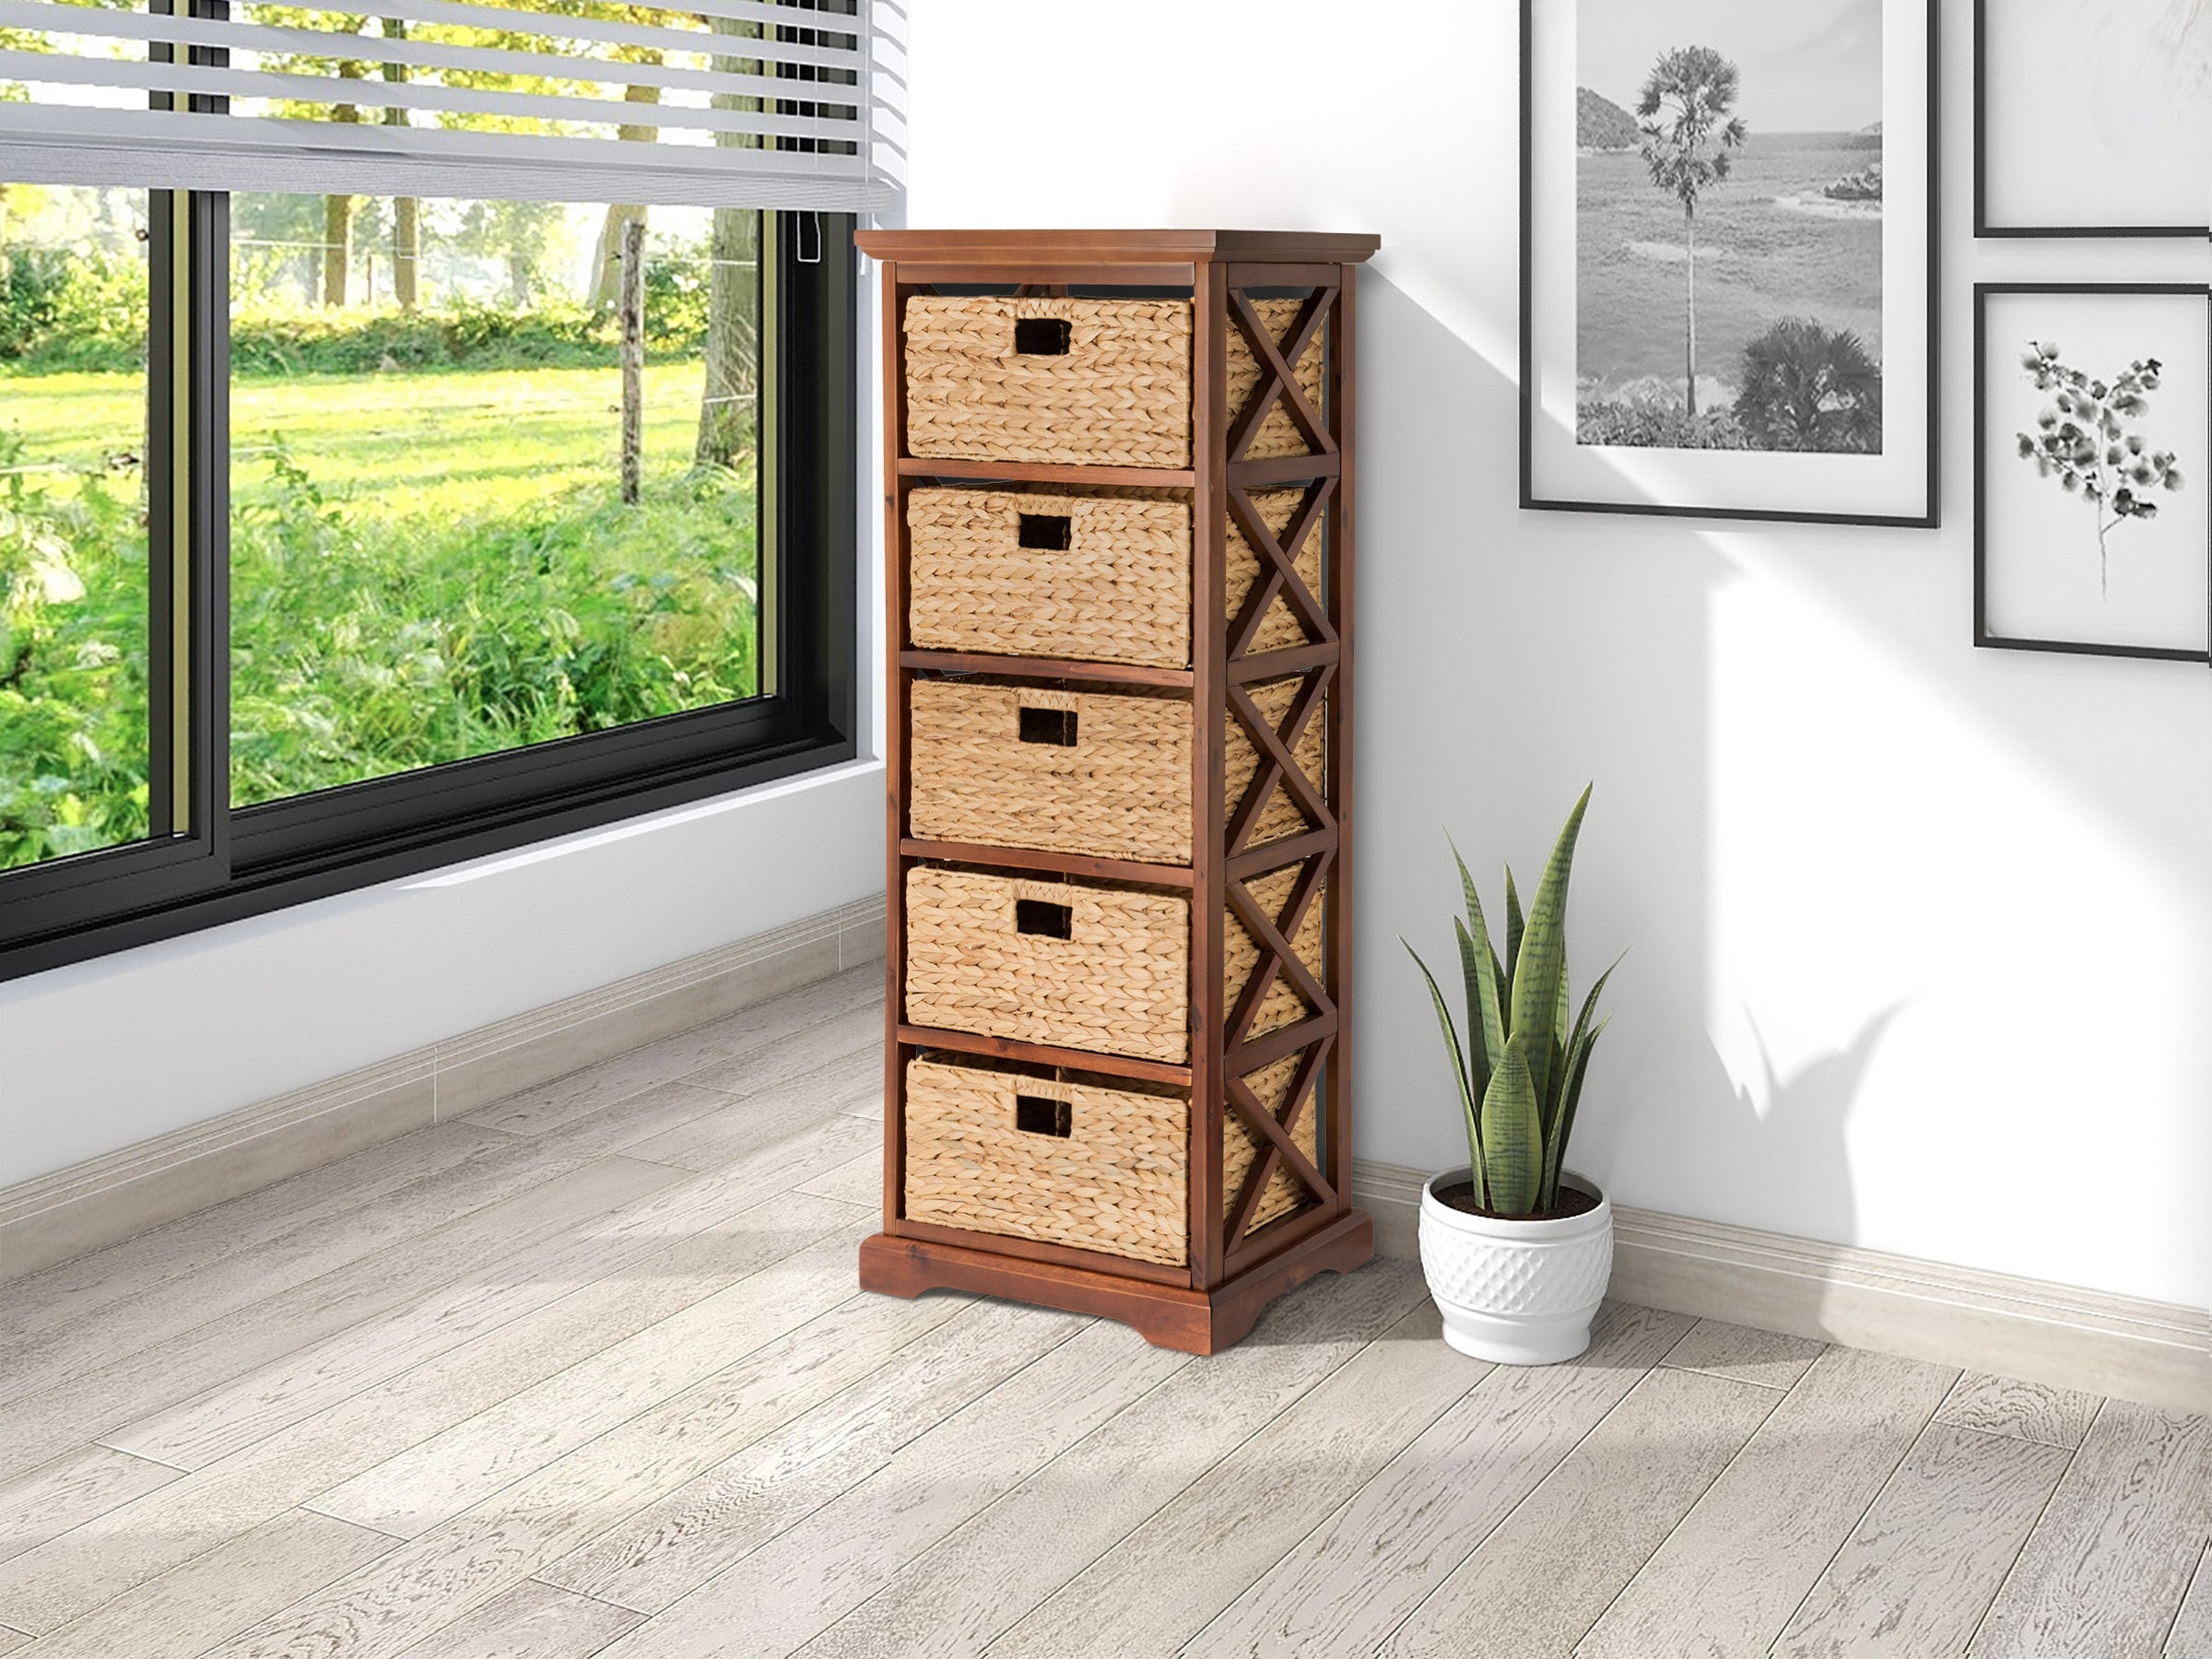 Wood Storage Accent Chest 4 Wicker Basket Drawers Taupe - Olivia & May